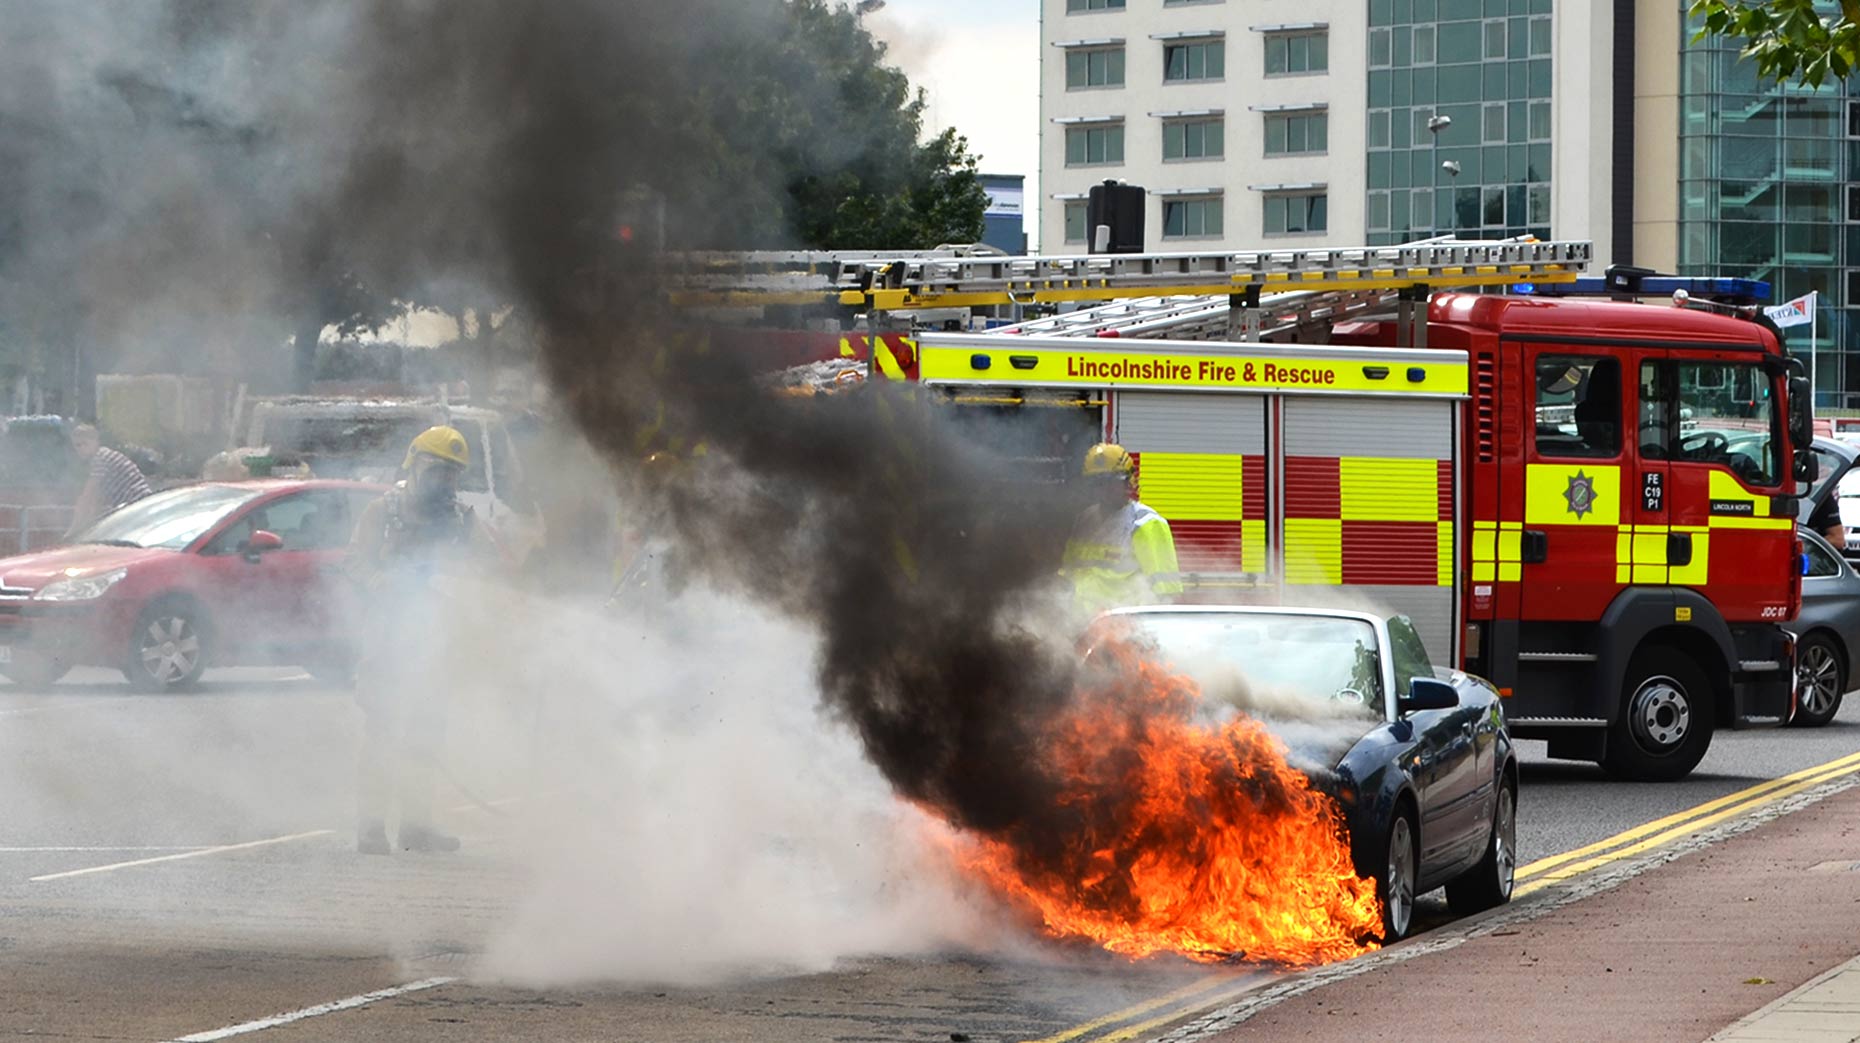 The scene after an Audi A4 convertible caught fire on Rope Walk in Lincoln. Photo: Emily Norton for The Lincolnite